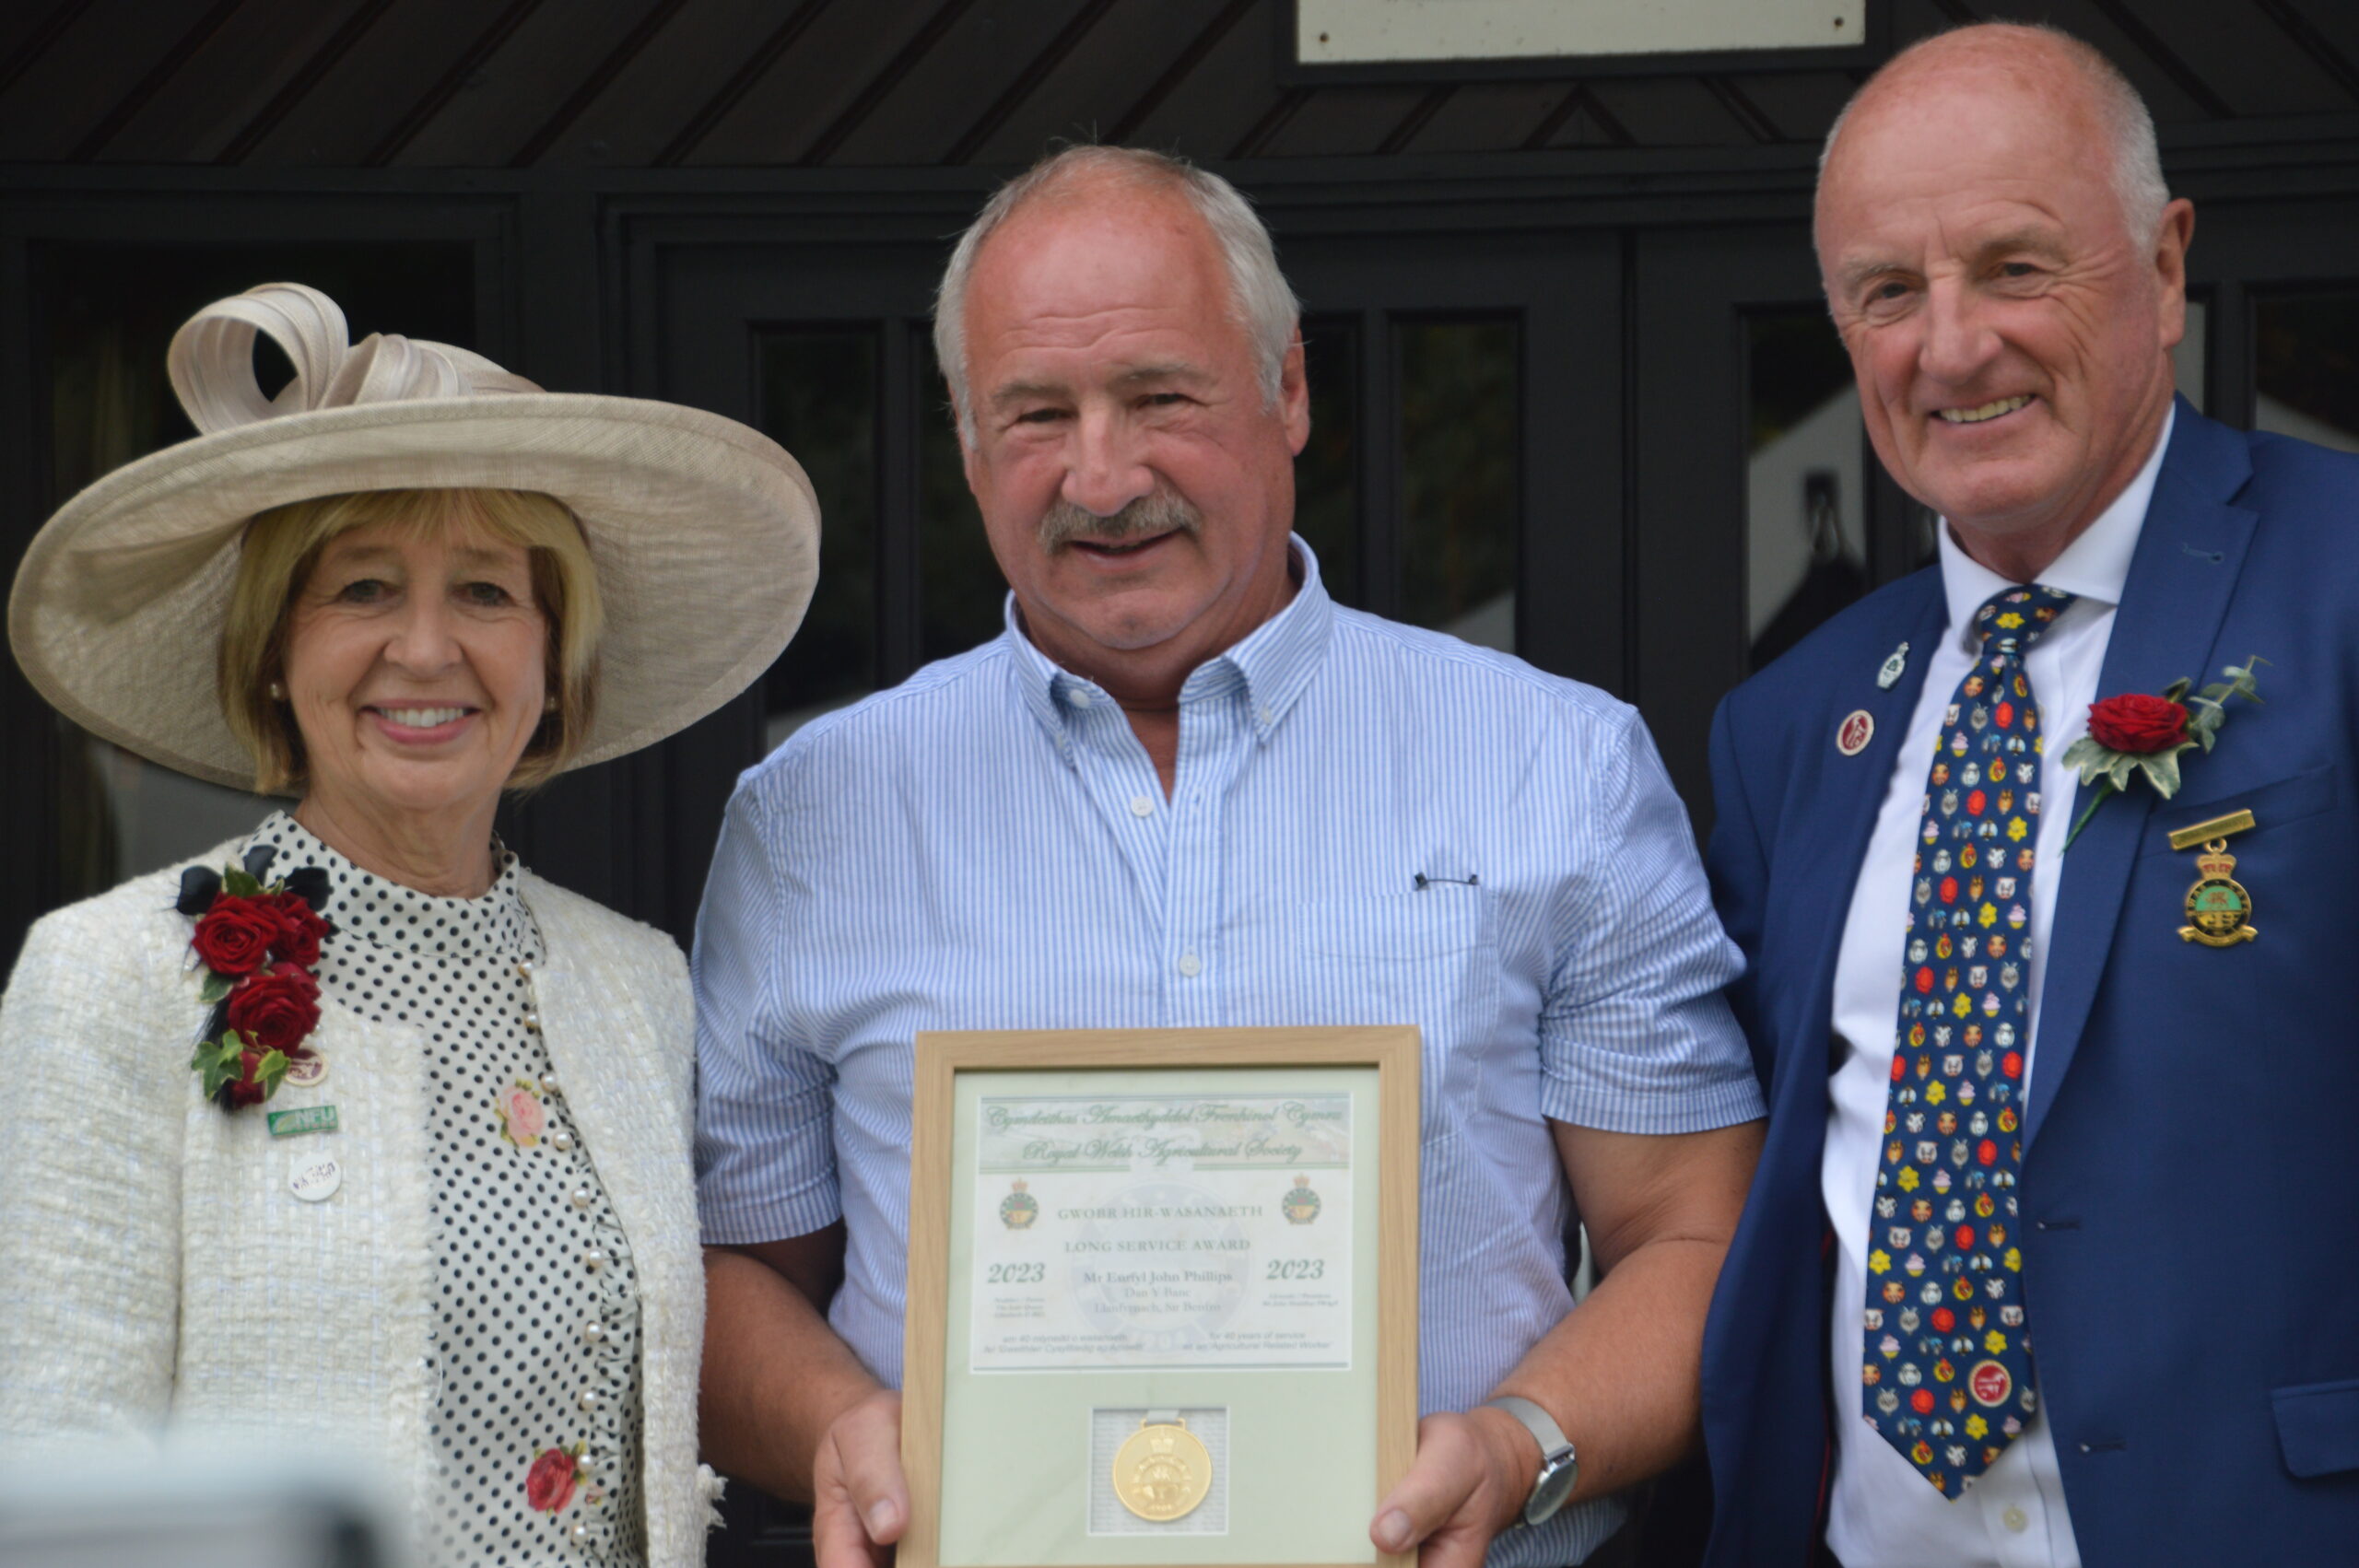 Honorary Awards for outstanding commitment to the Society presented at Royal Welsh